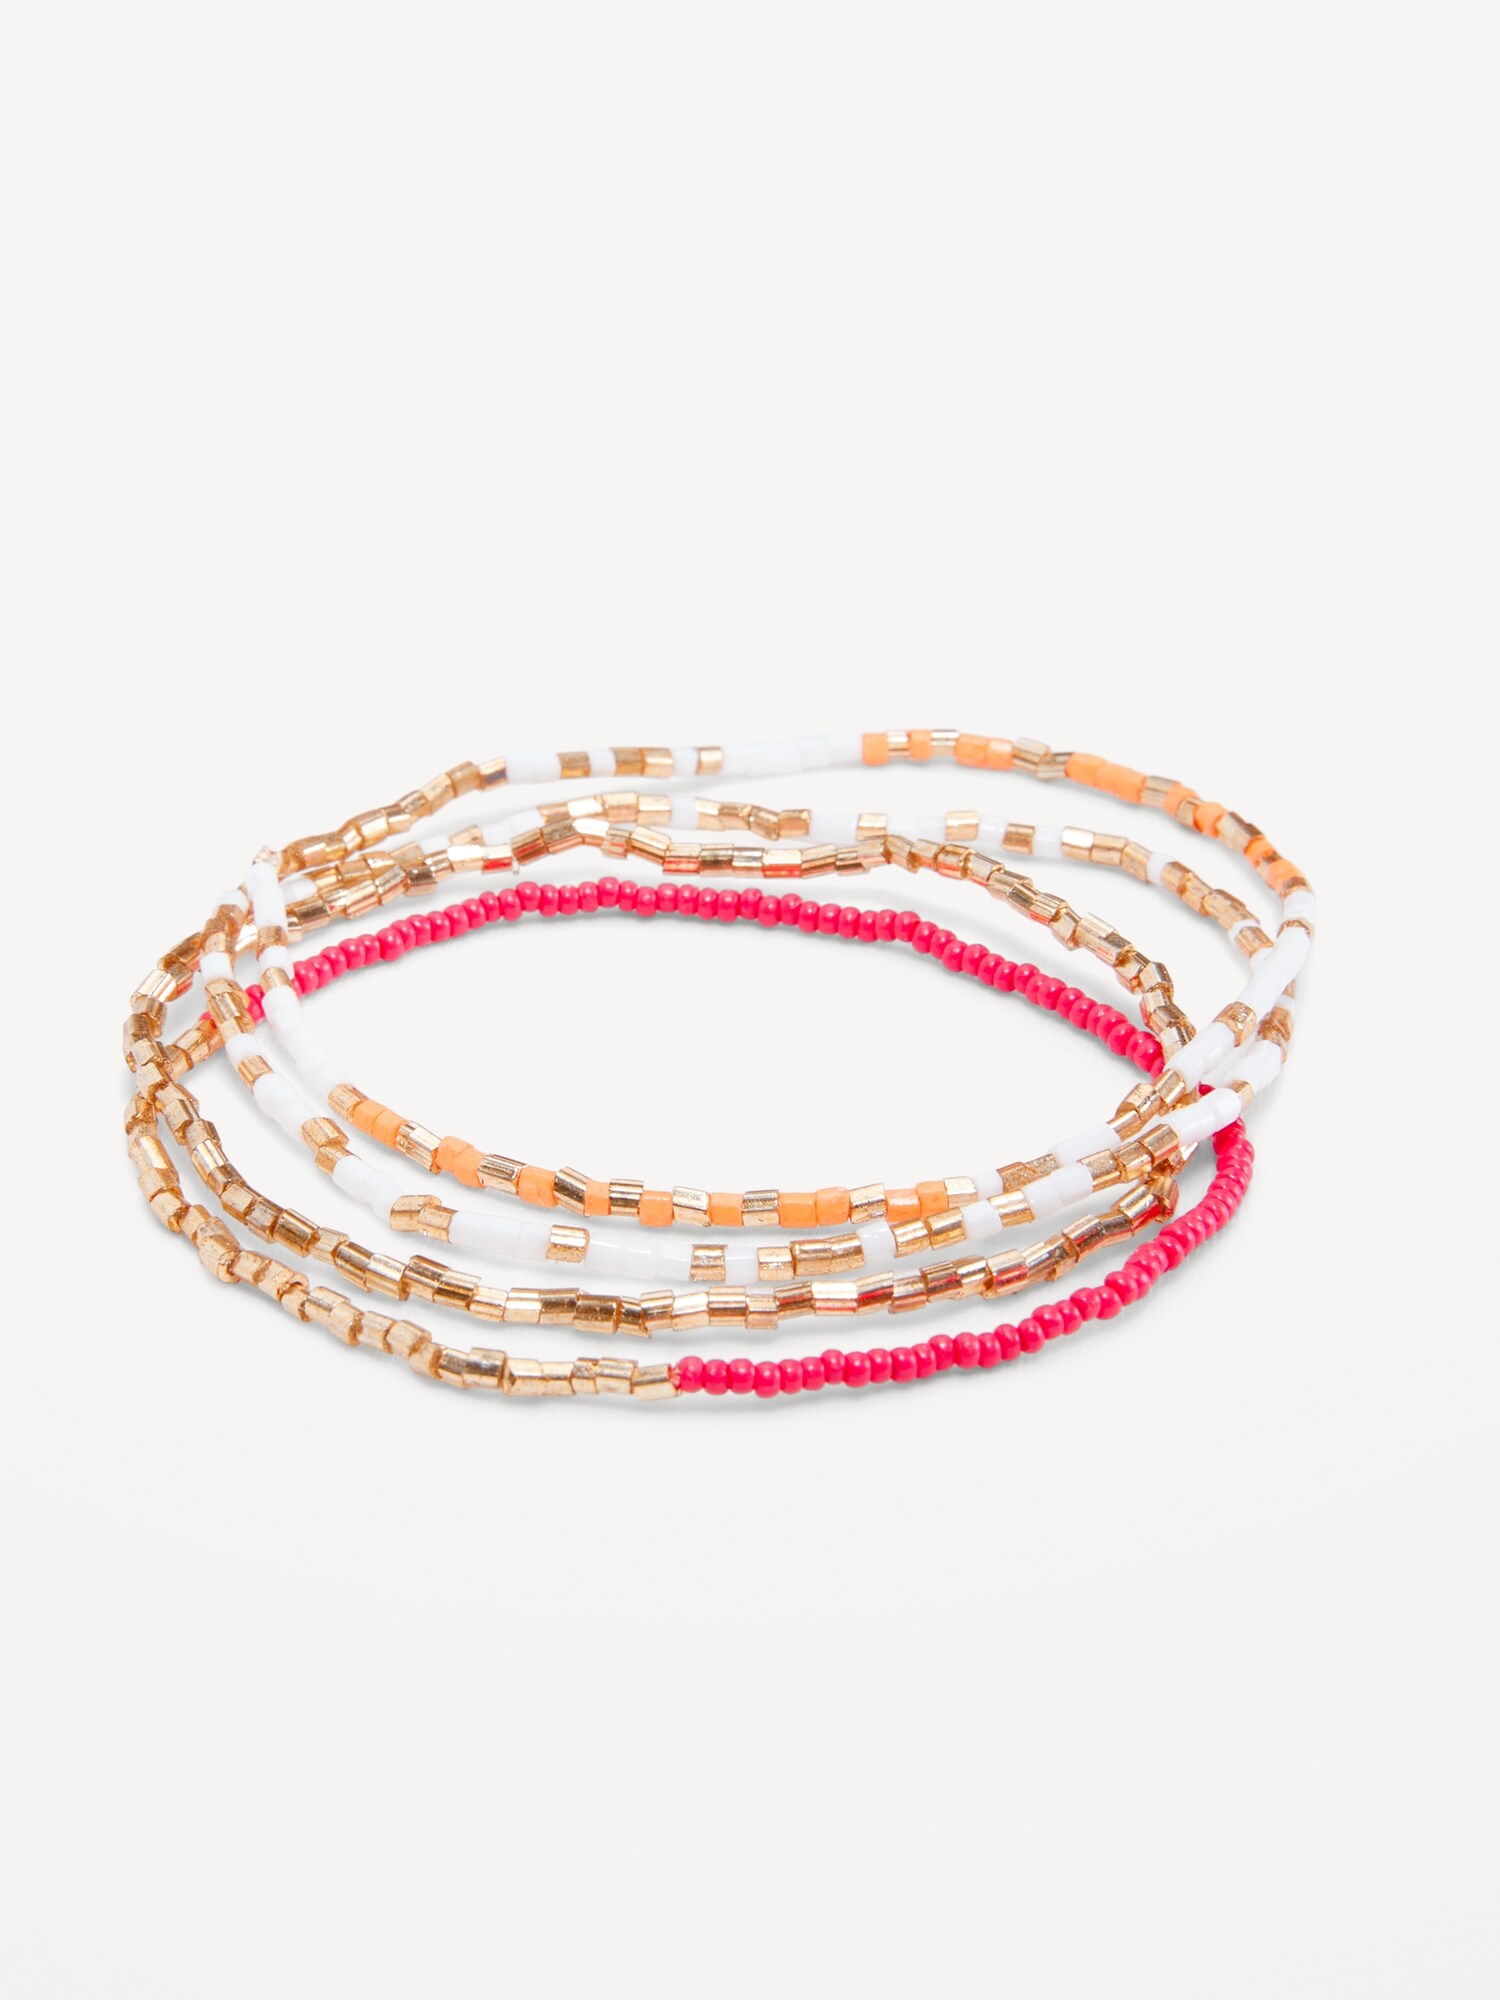 Gold-Plated Beaded Stretch Bracelet 4-Pack for Women